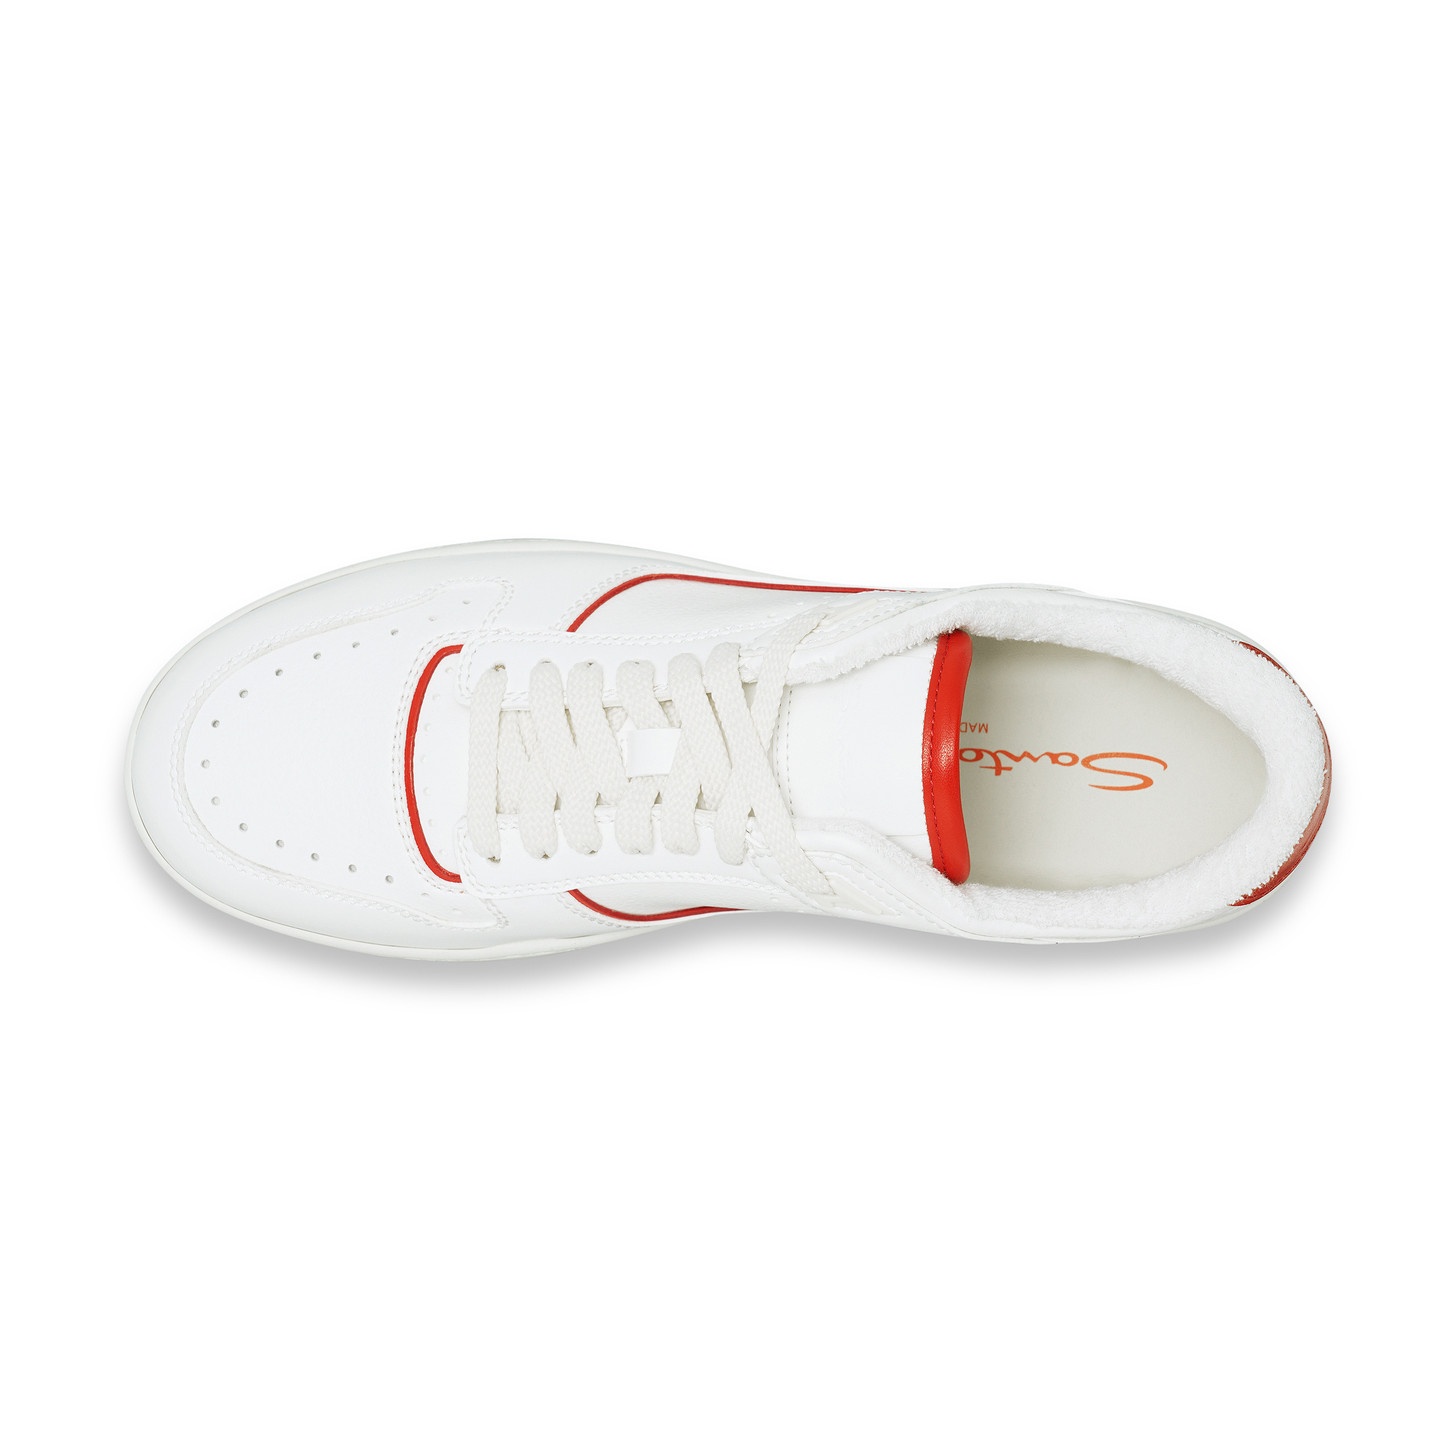 Men's white and red leather Sneak-Air sneaker - 5